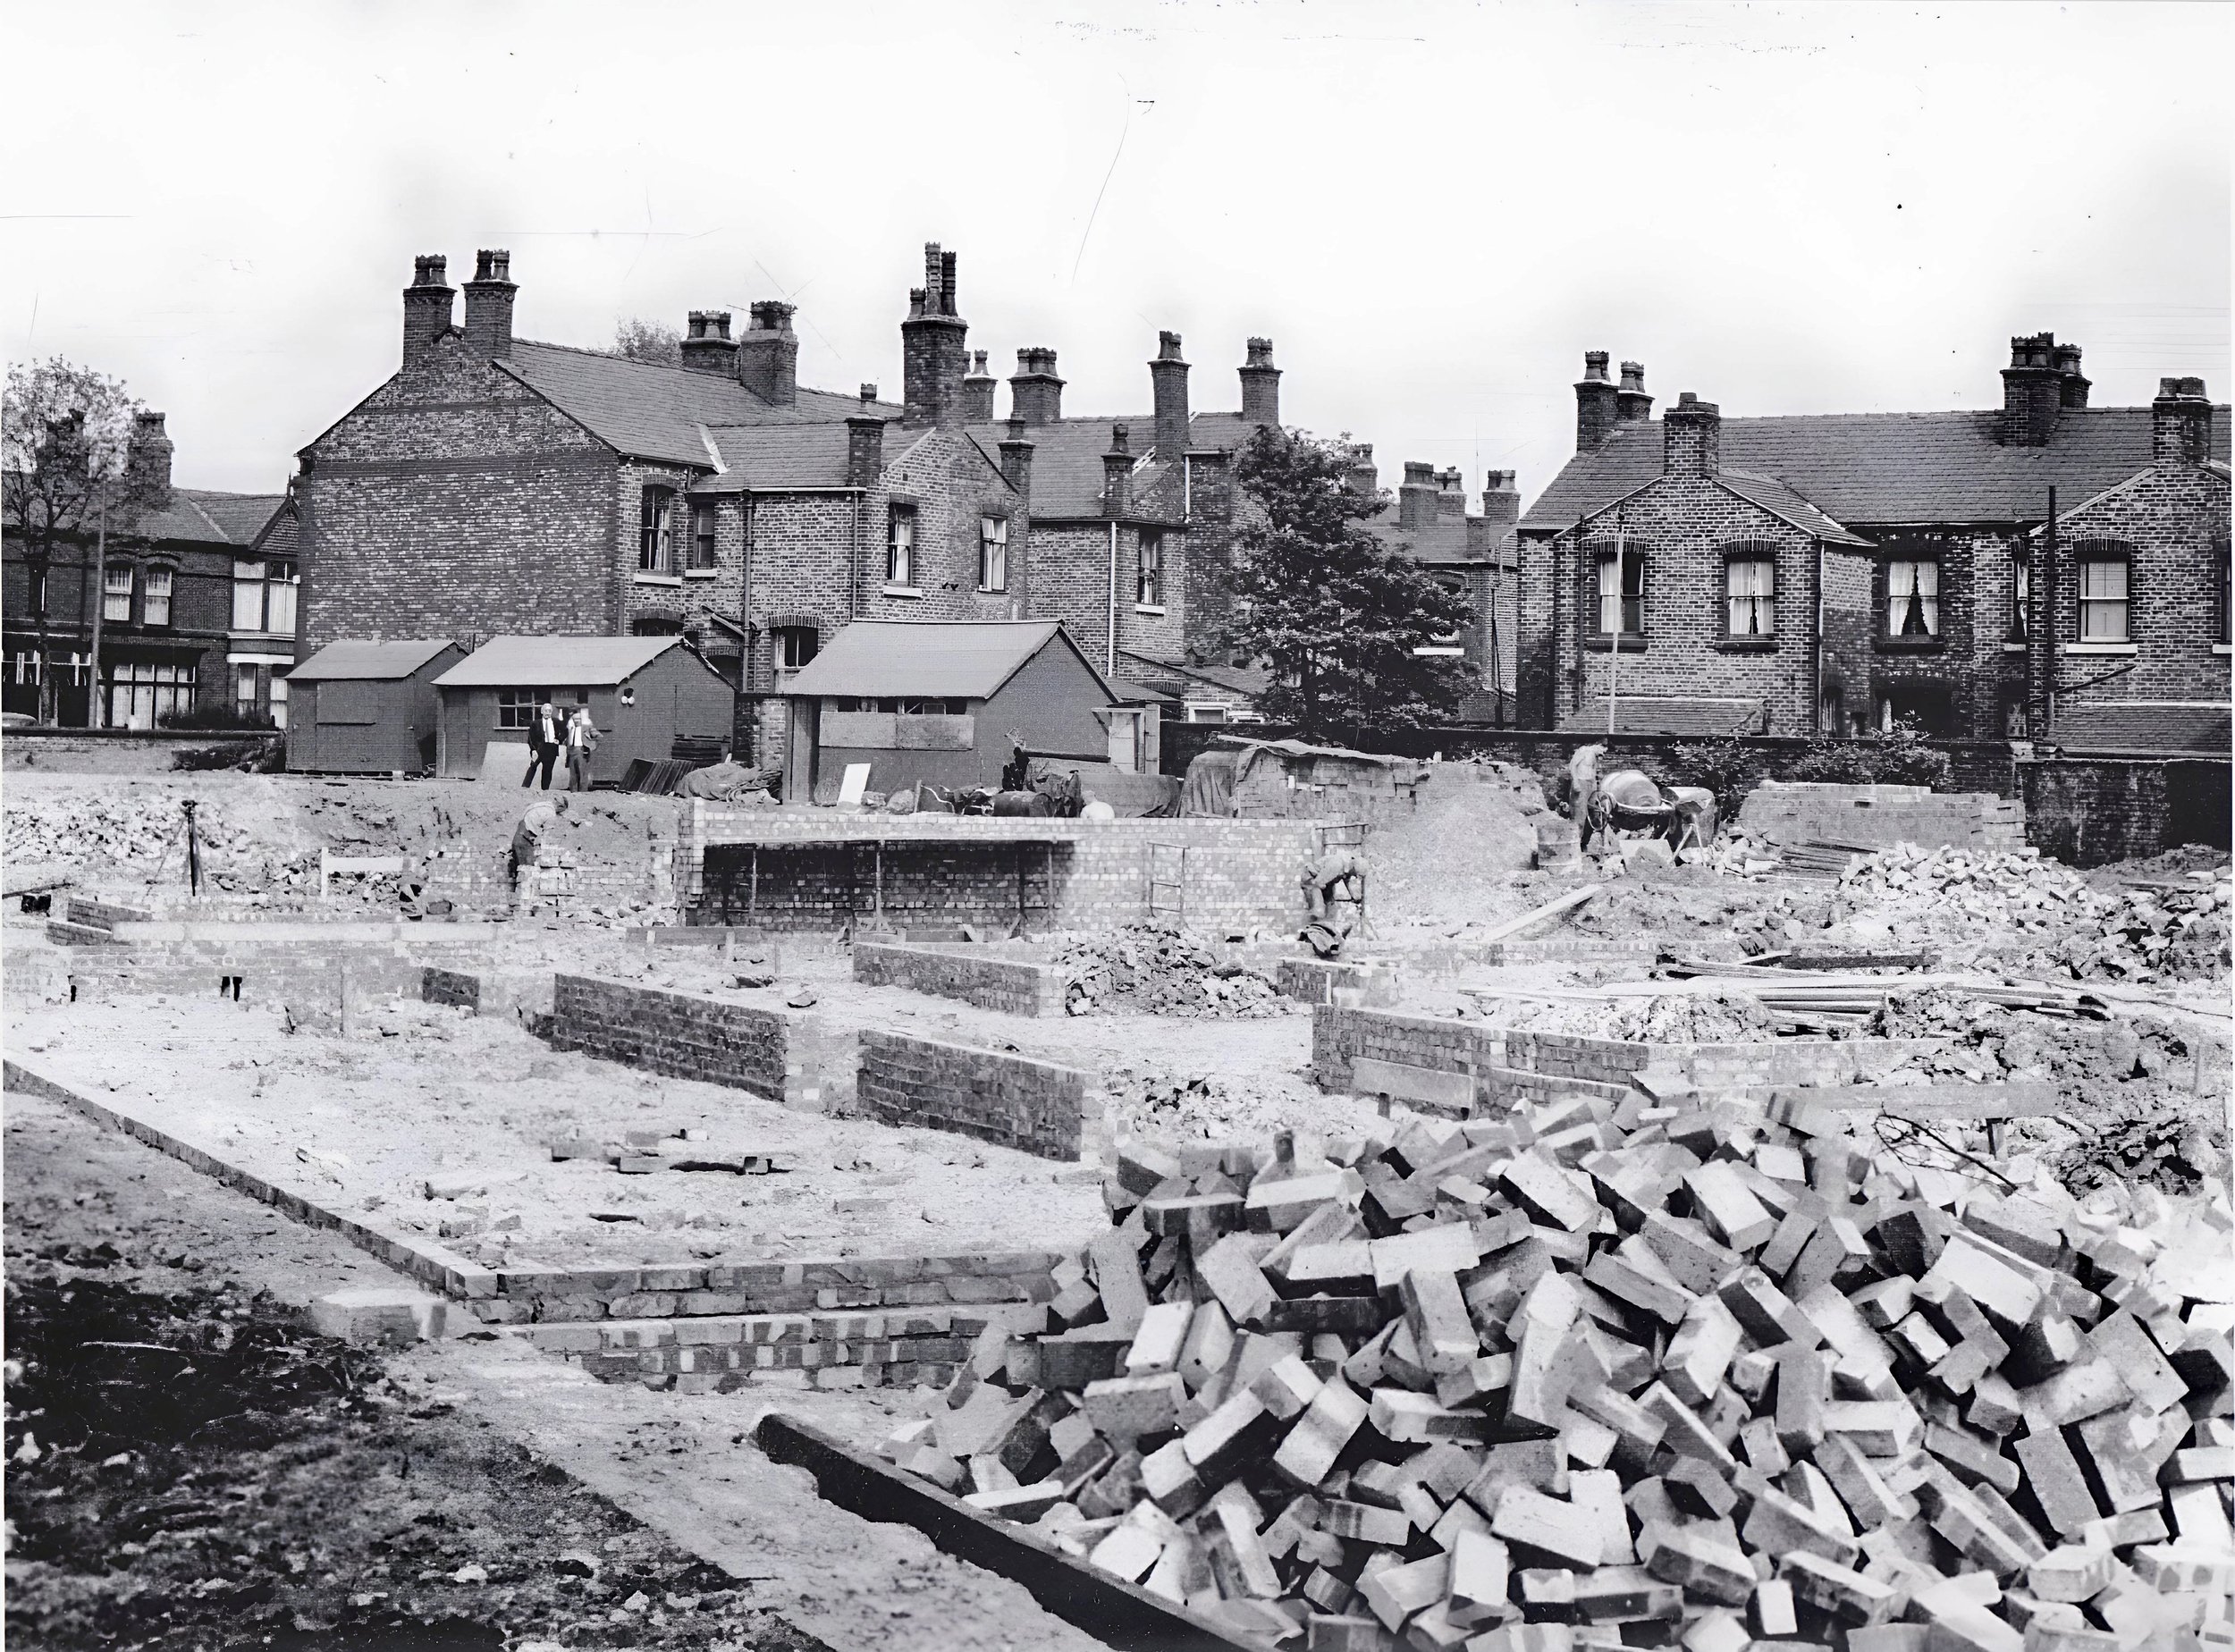 Construction on the site of the old rectory 1963